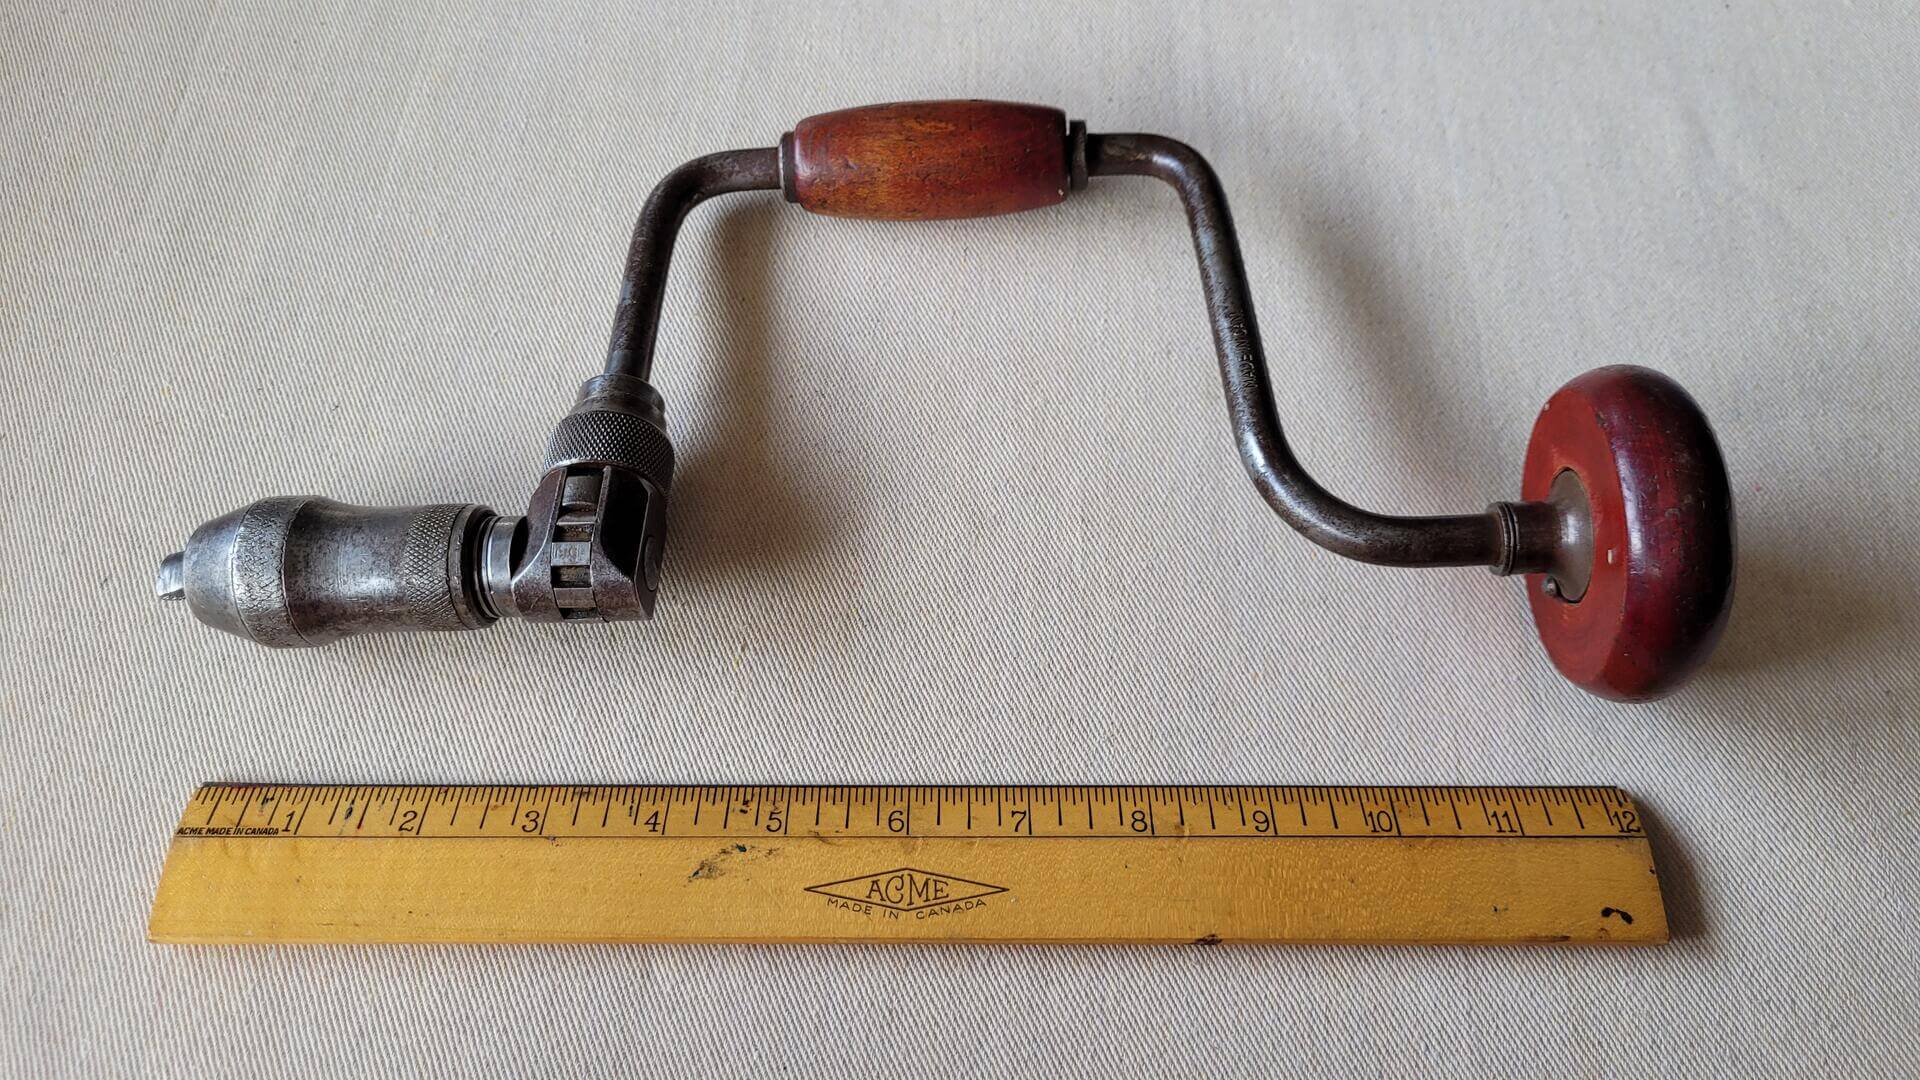 Antique ratcheting reversible auger bit brace hand drill. Vintage made in Canada collectible carpentry, woodworking and cabinet maker hand tools